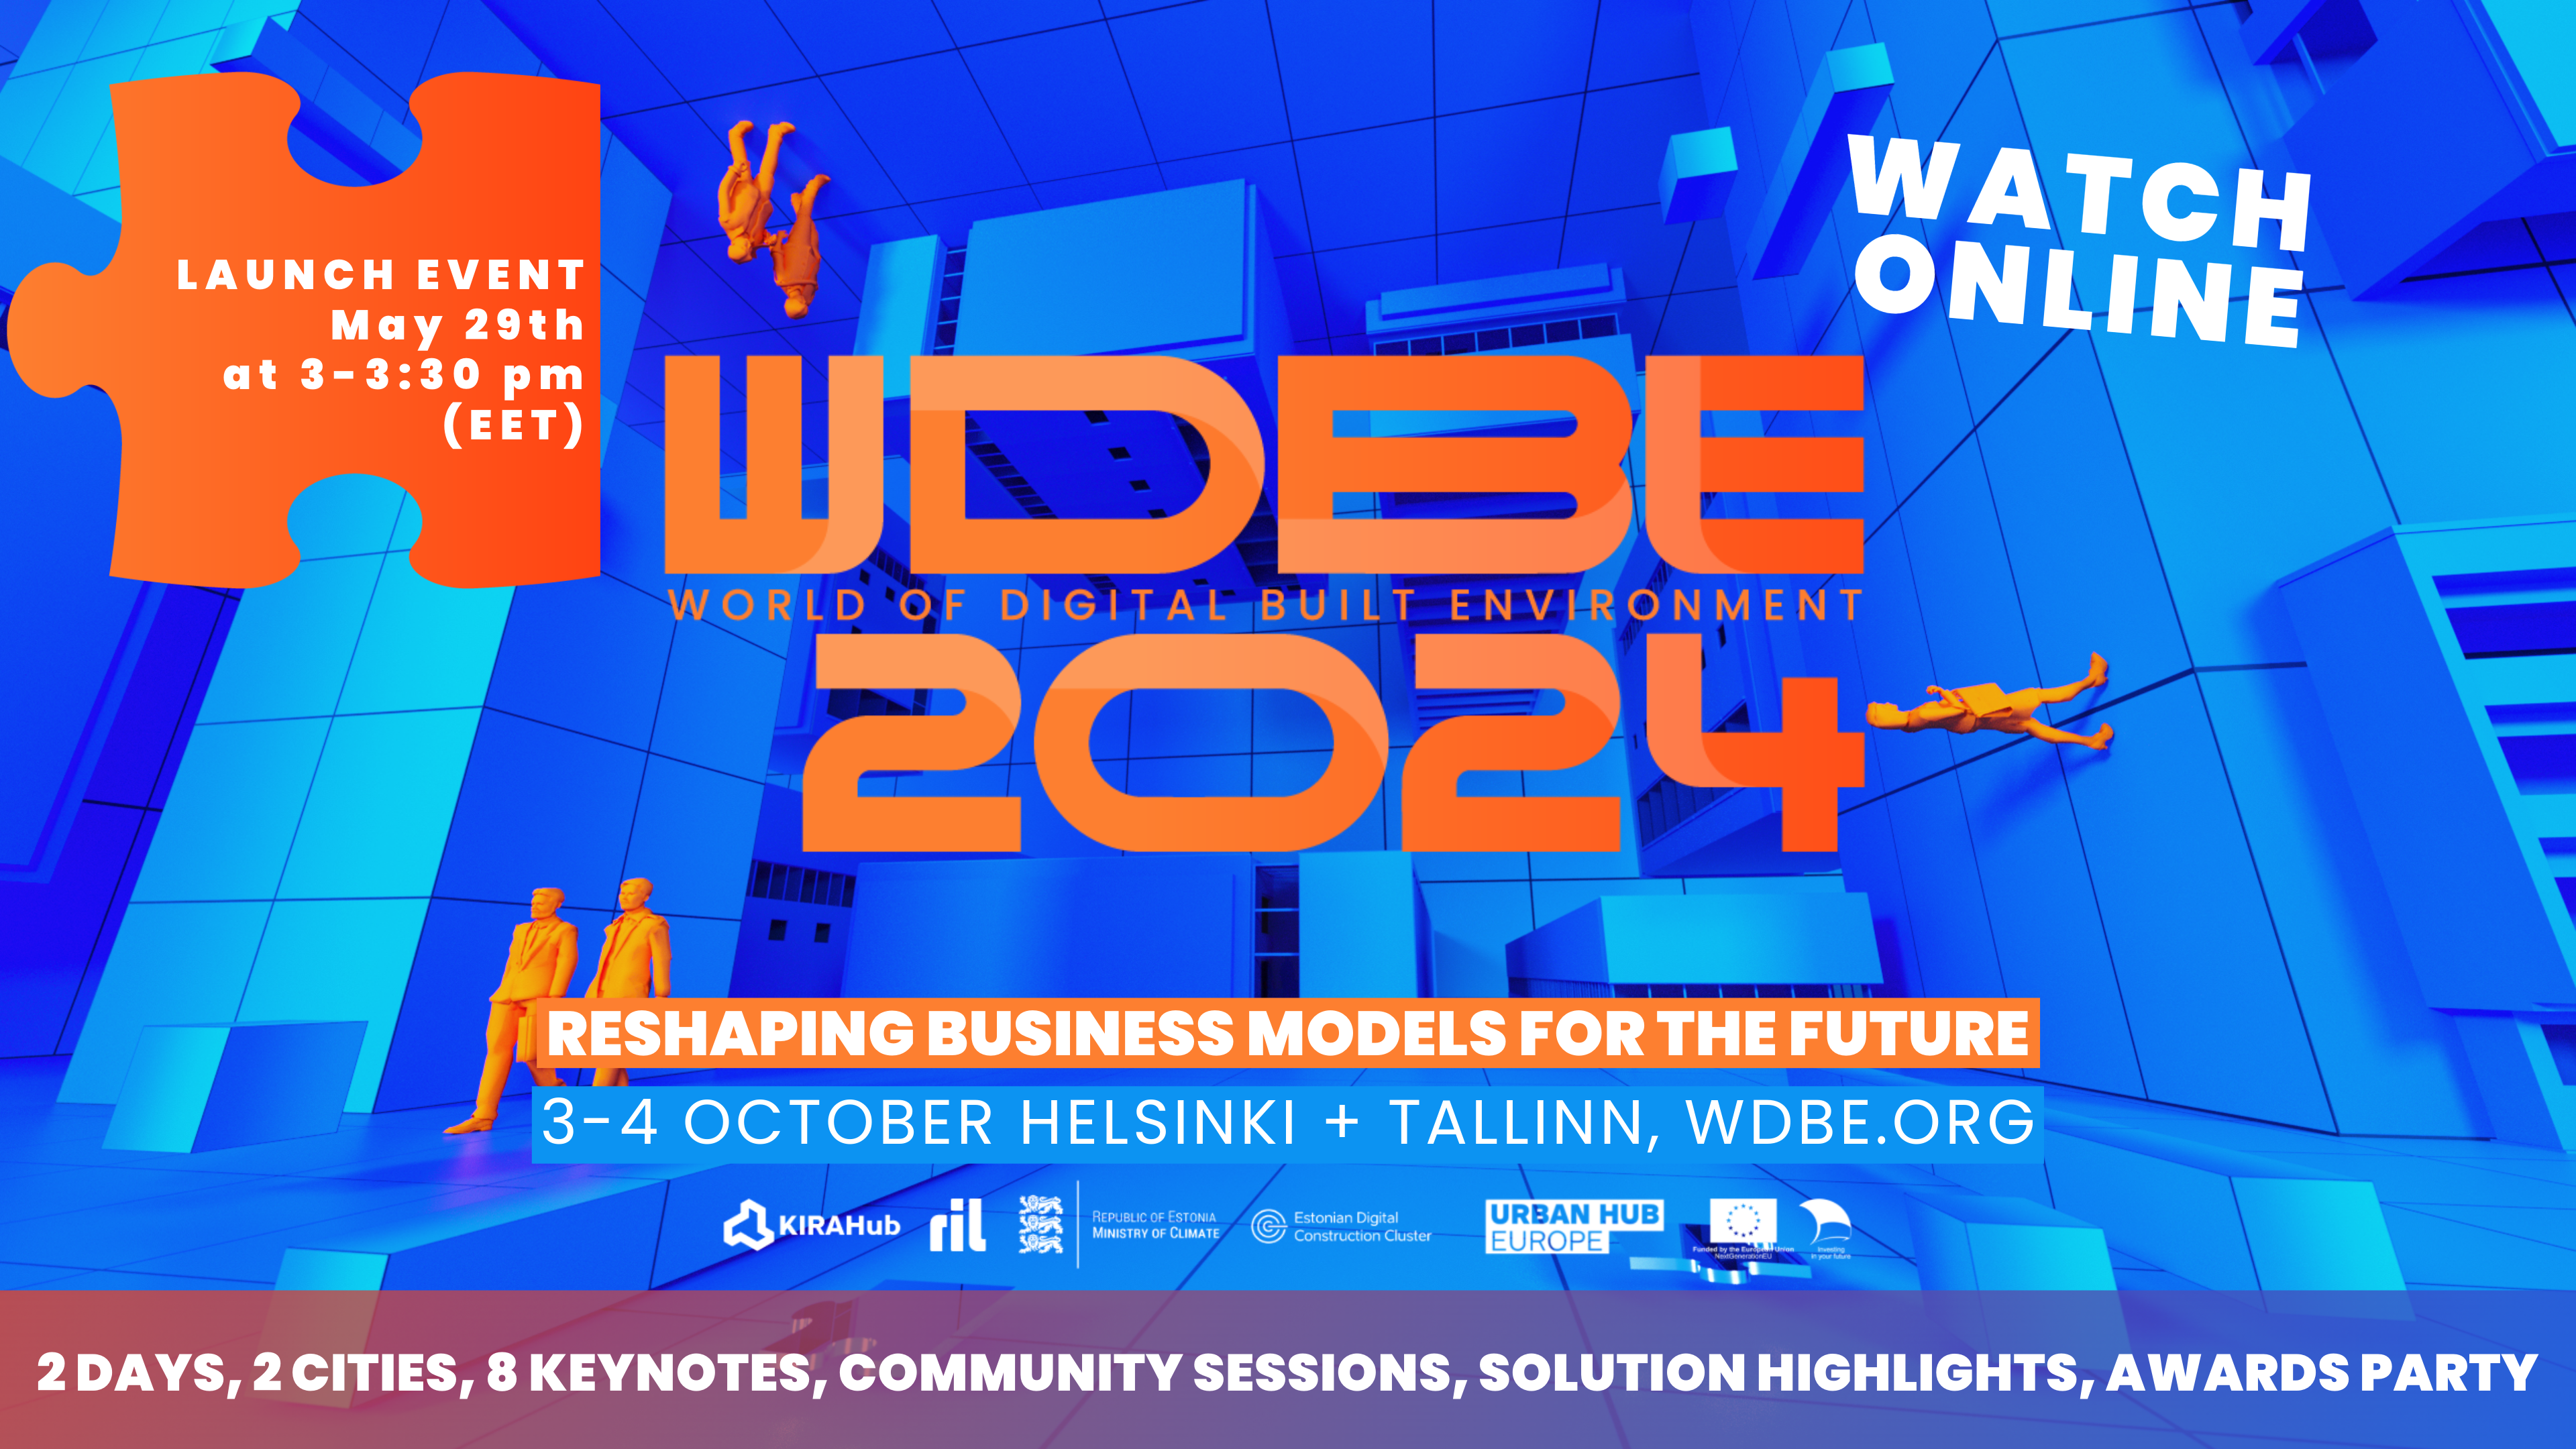 WDBE2024 Summit Launch Event